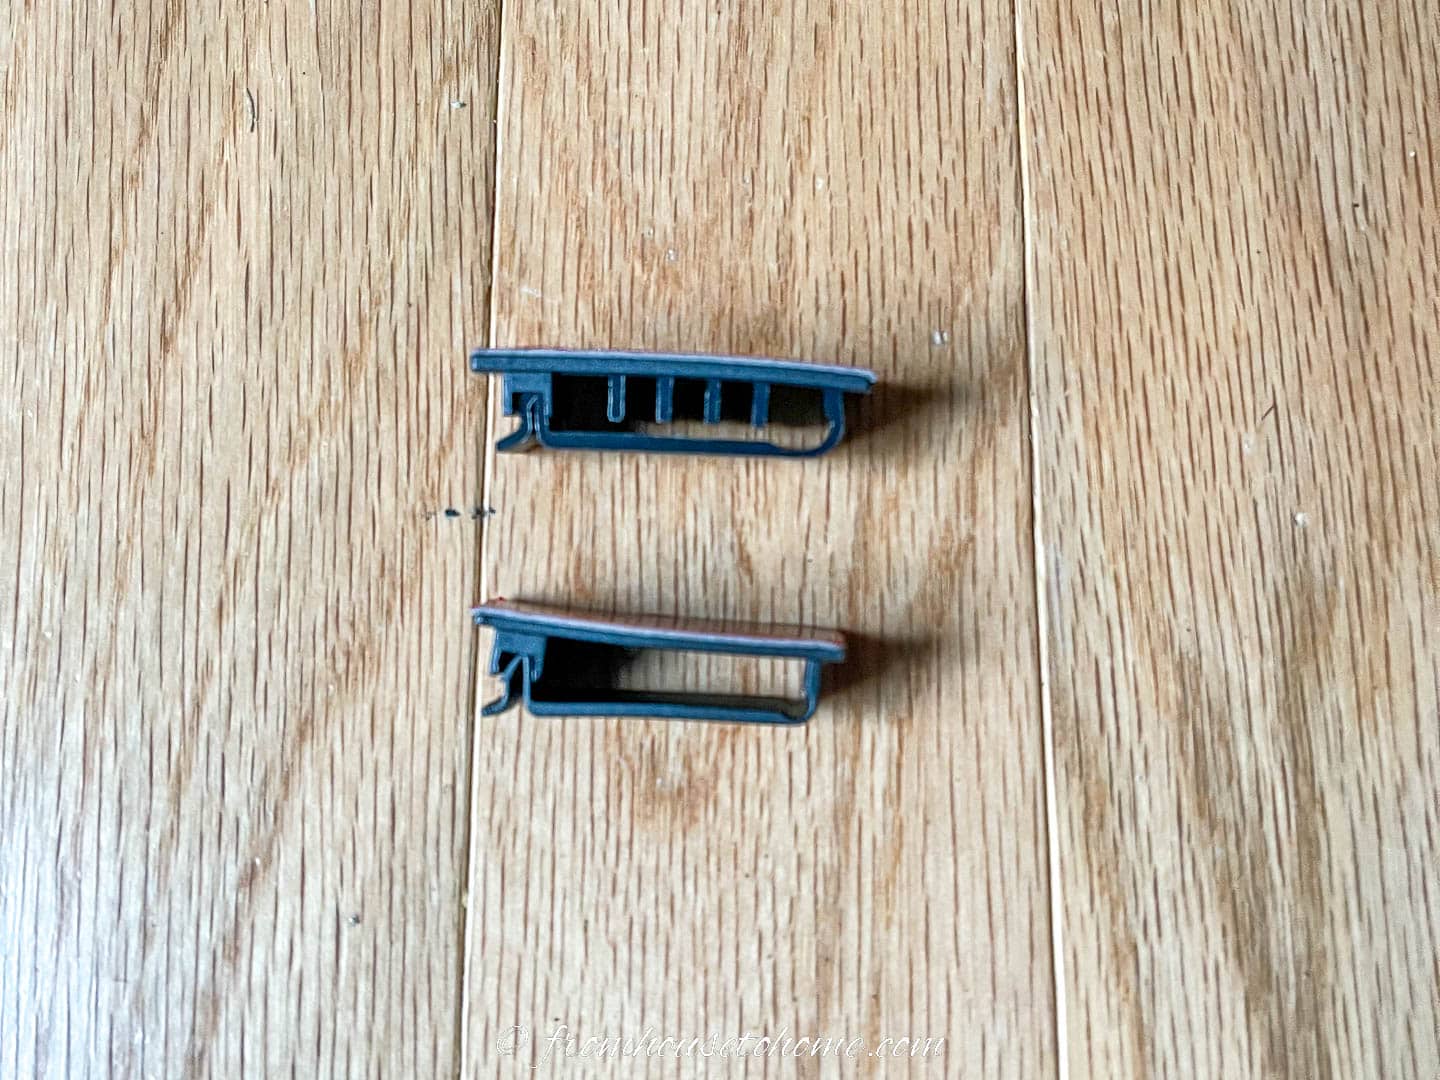 Two types of self-adhesive computer cable clips